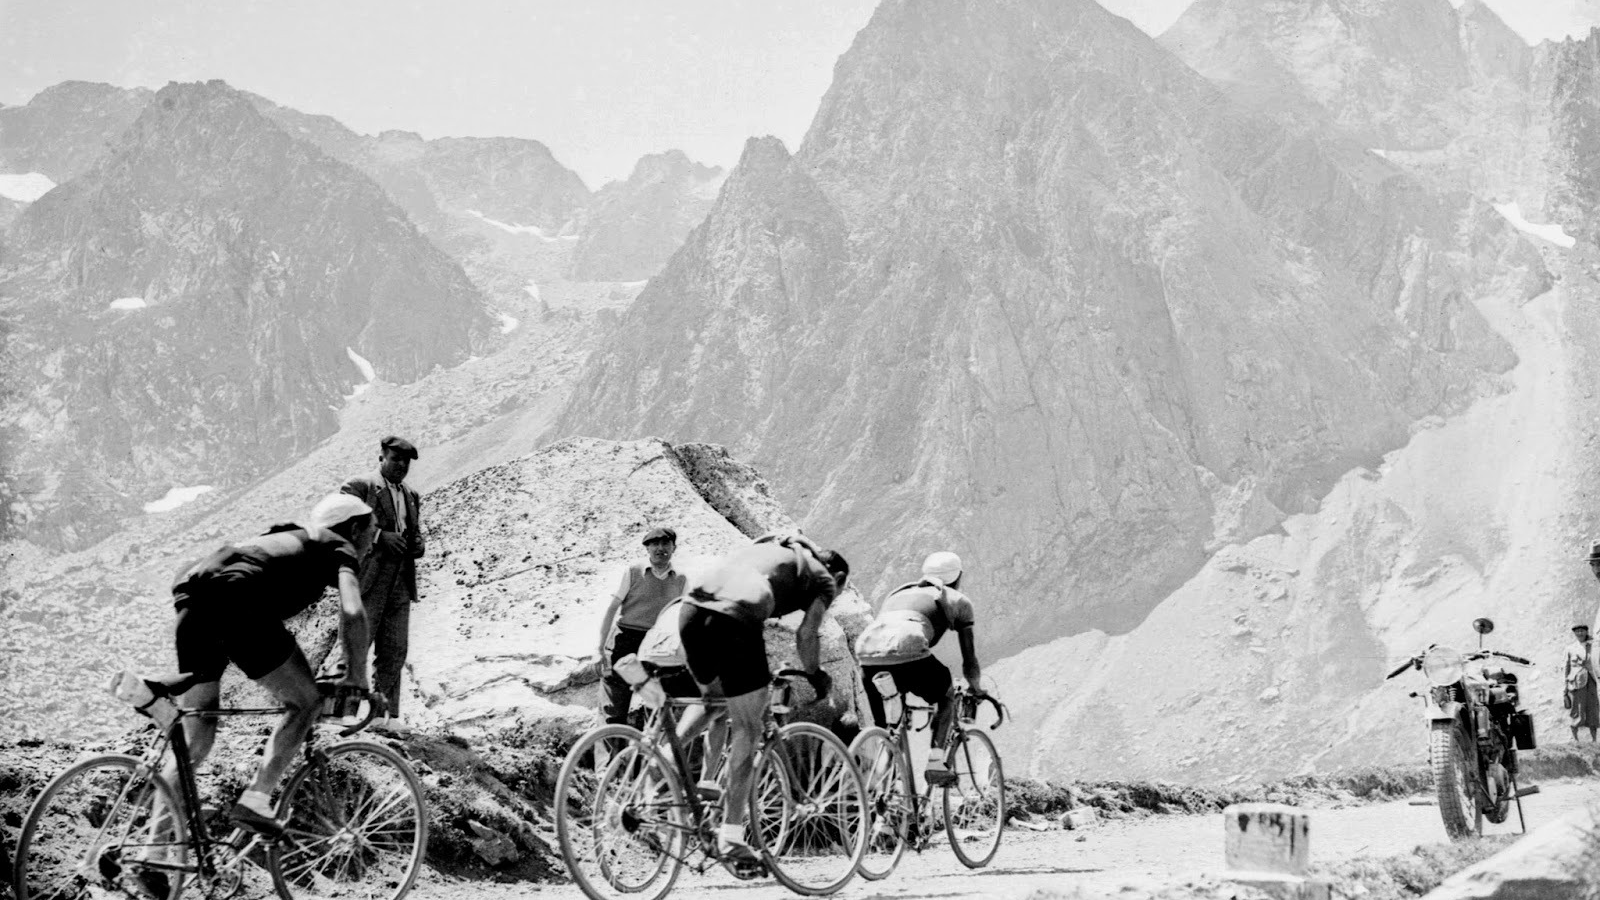 Iconic image about road cycling races in the hight mountains: cyclists climbing the mighty Tourmalet at Tour de France 1937.